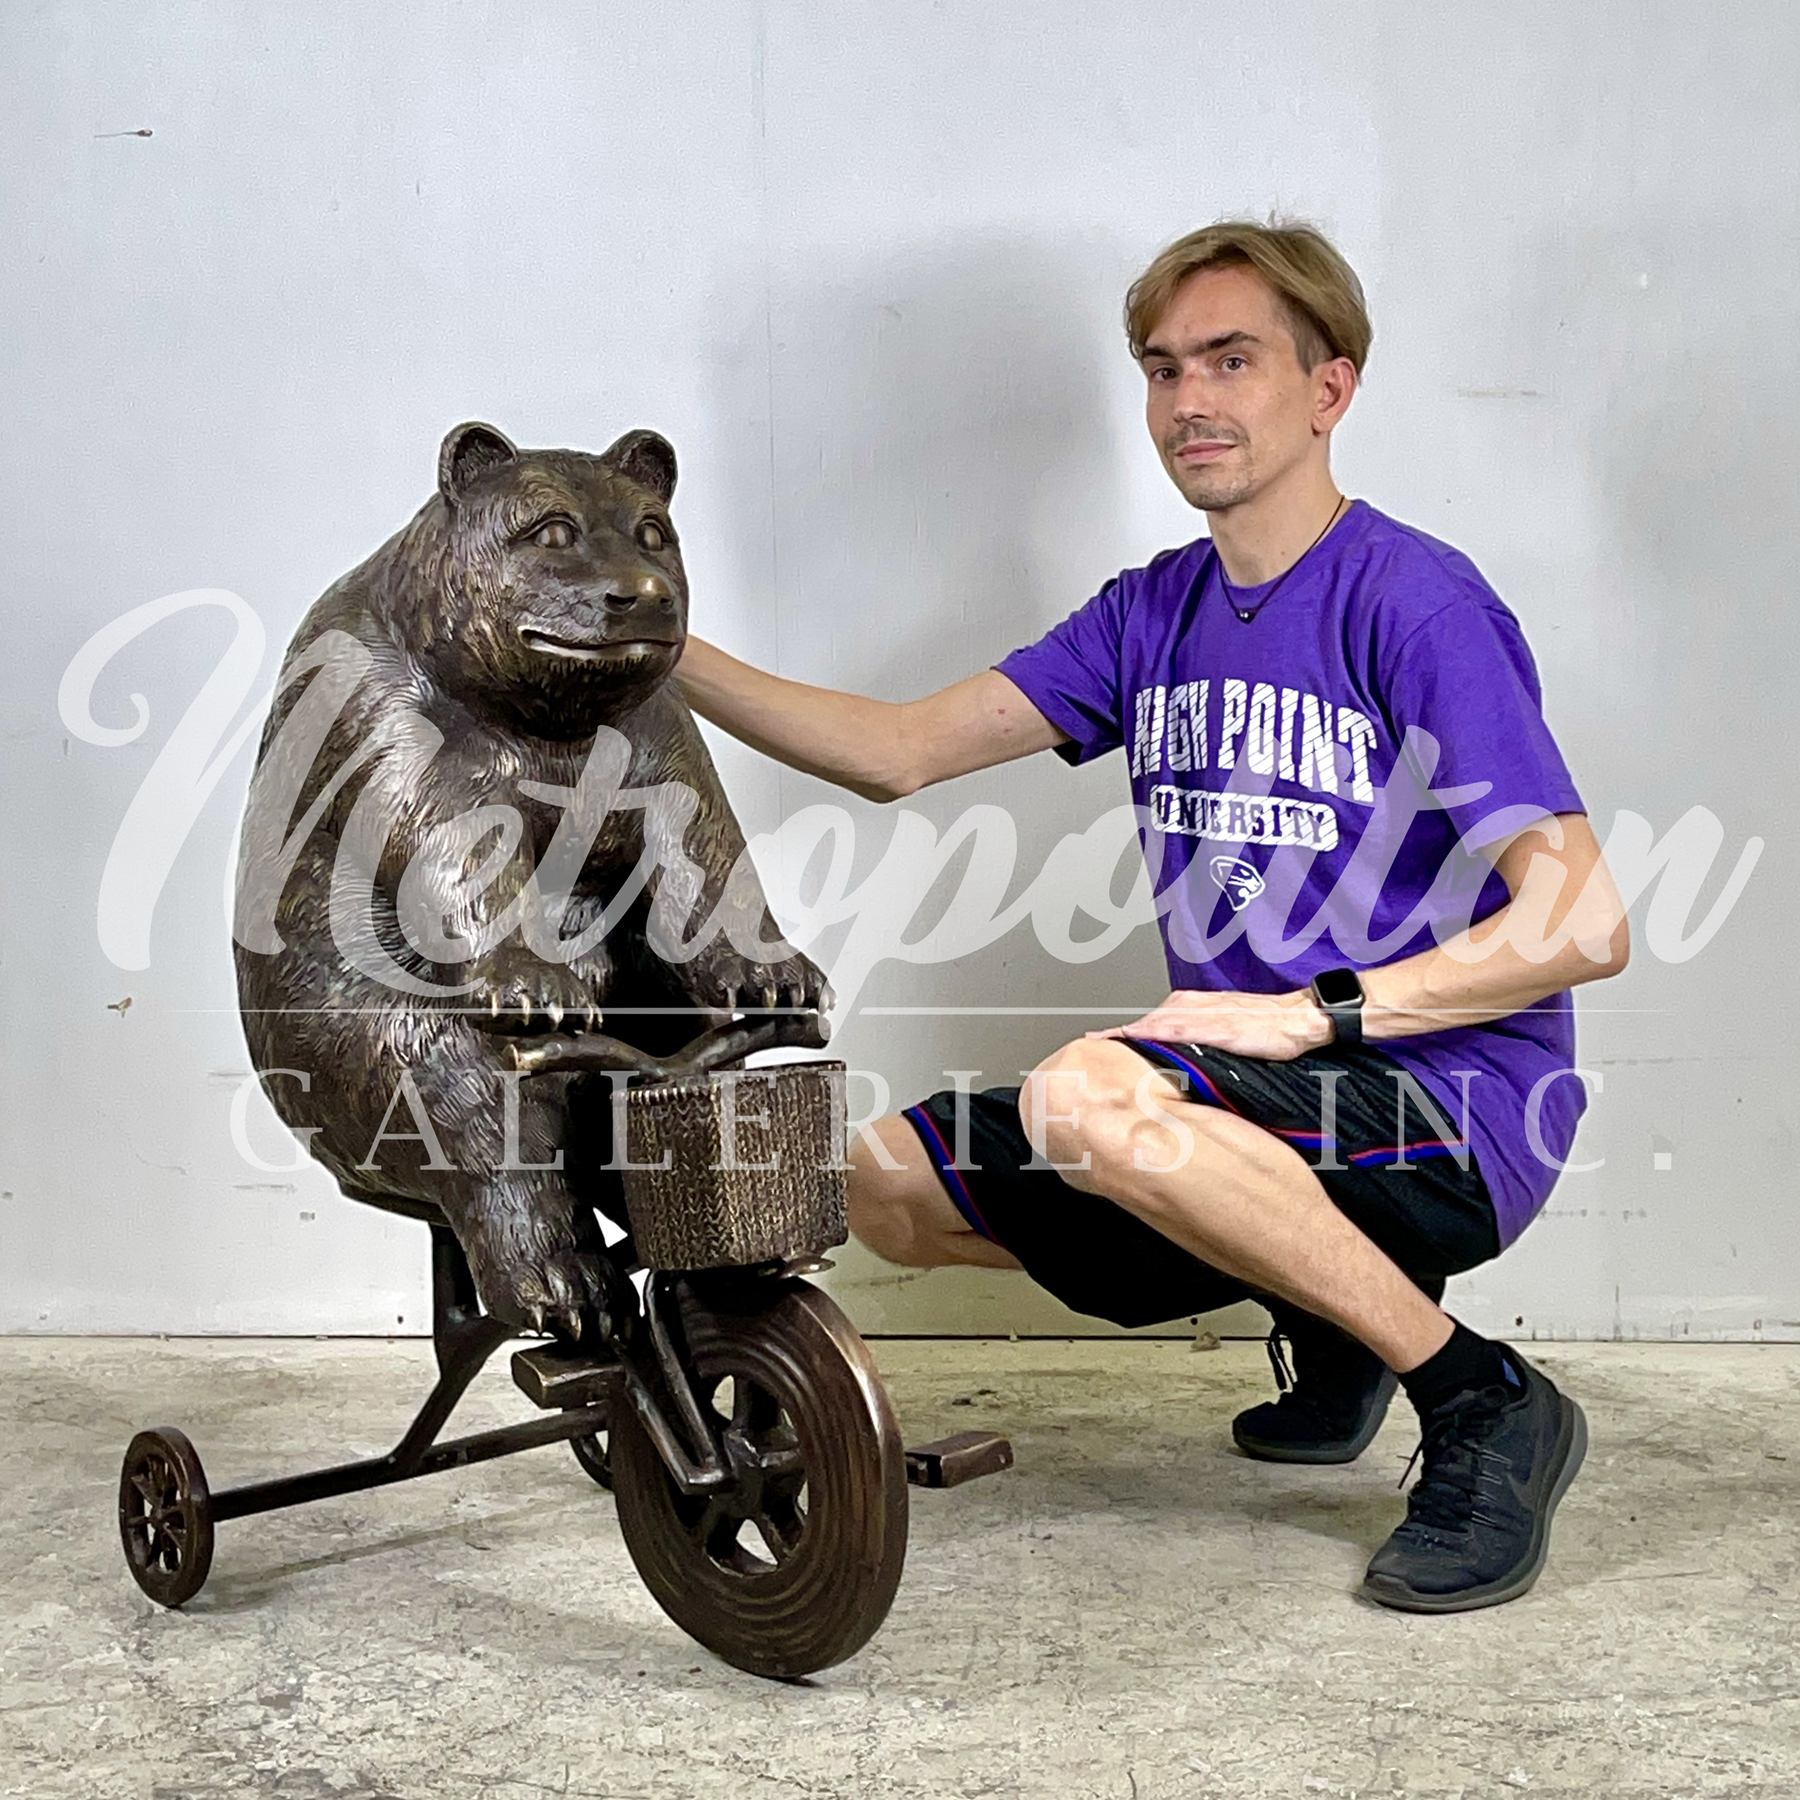 SRB10126 Bronze Bear riding Tricycle Sculpture exclusively designed and produced by Metropolitan Galleries Inc SCALE WM